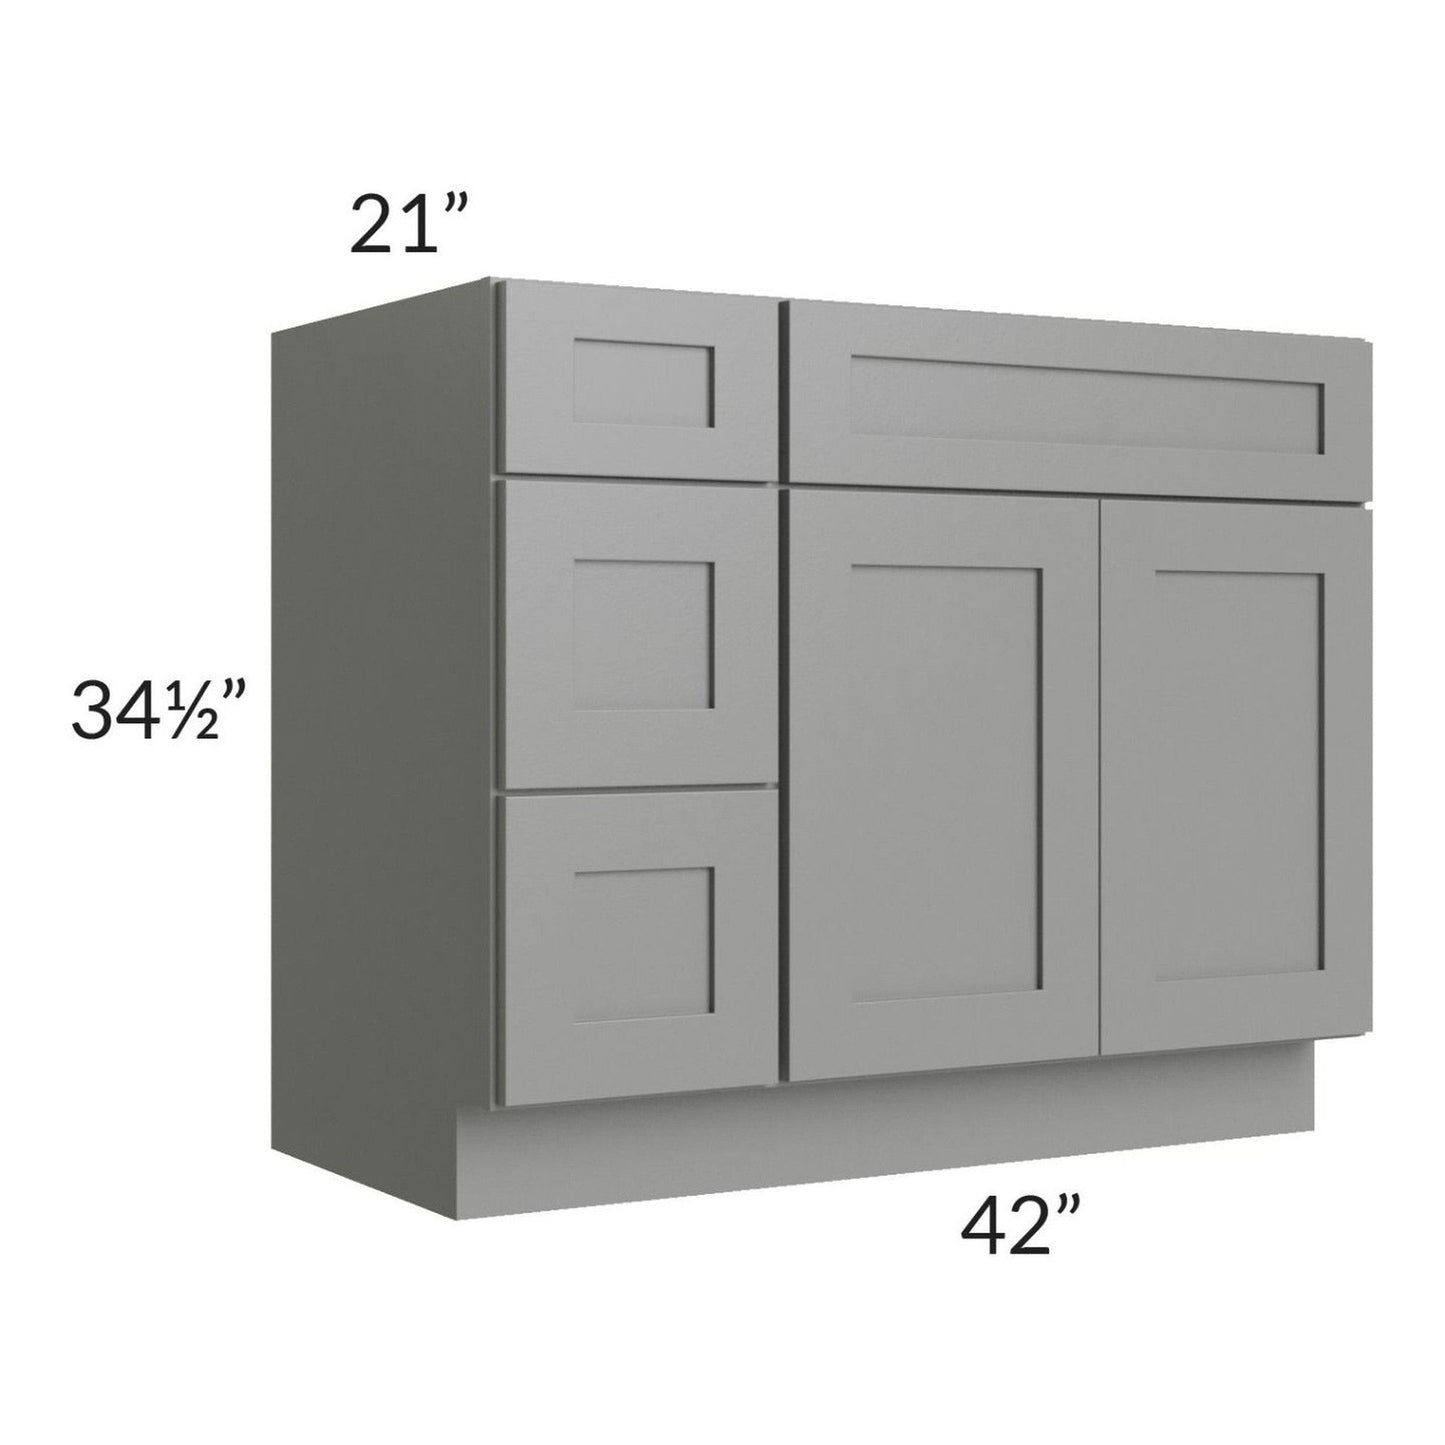 RTA Shale Grey Shaker 42" Vanity Sink Base Cabinet (Drawers on Left) with 1 Decorative End Panel